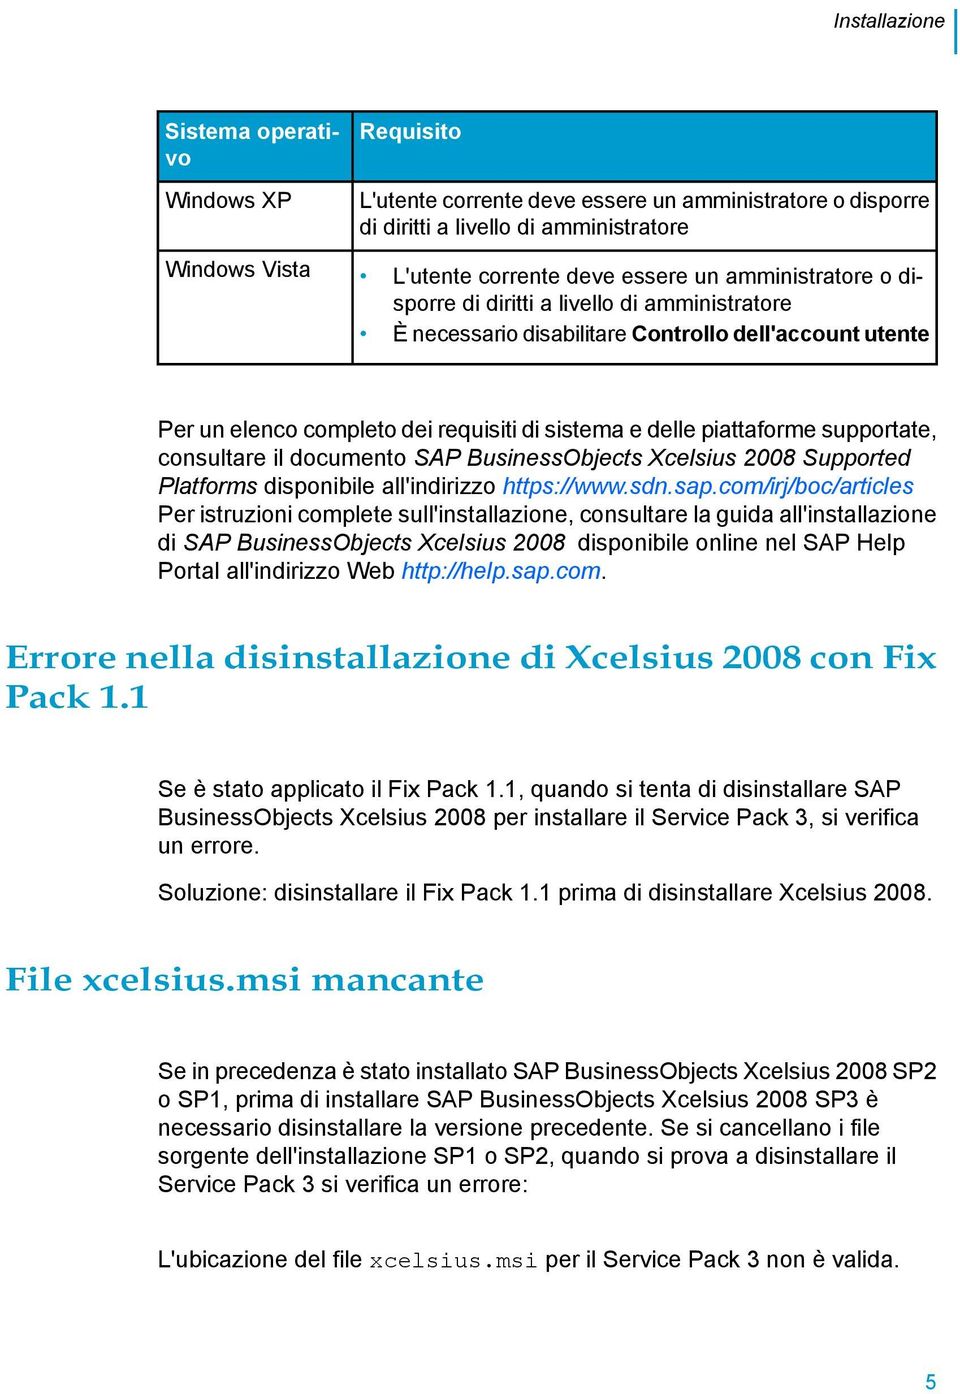 supportate, consultare il documento SAP BusinessObjects Xcelsius 2008 Supported Platforms disponibile all'indirizzo https://www.sdn.sap.